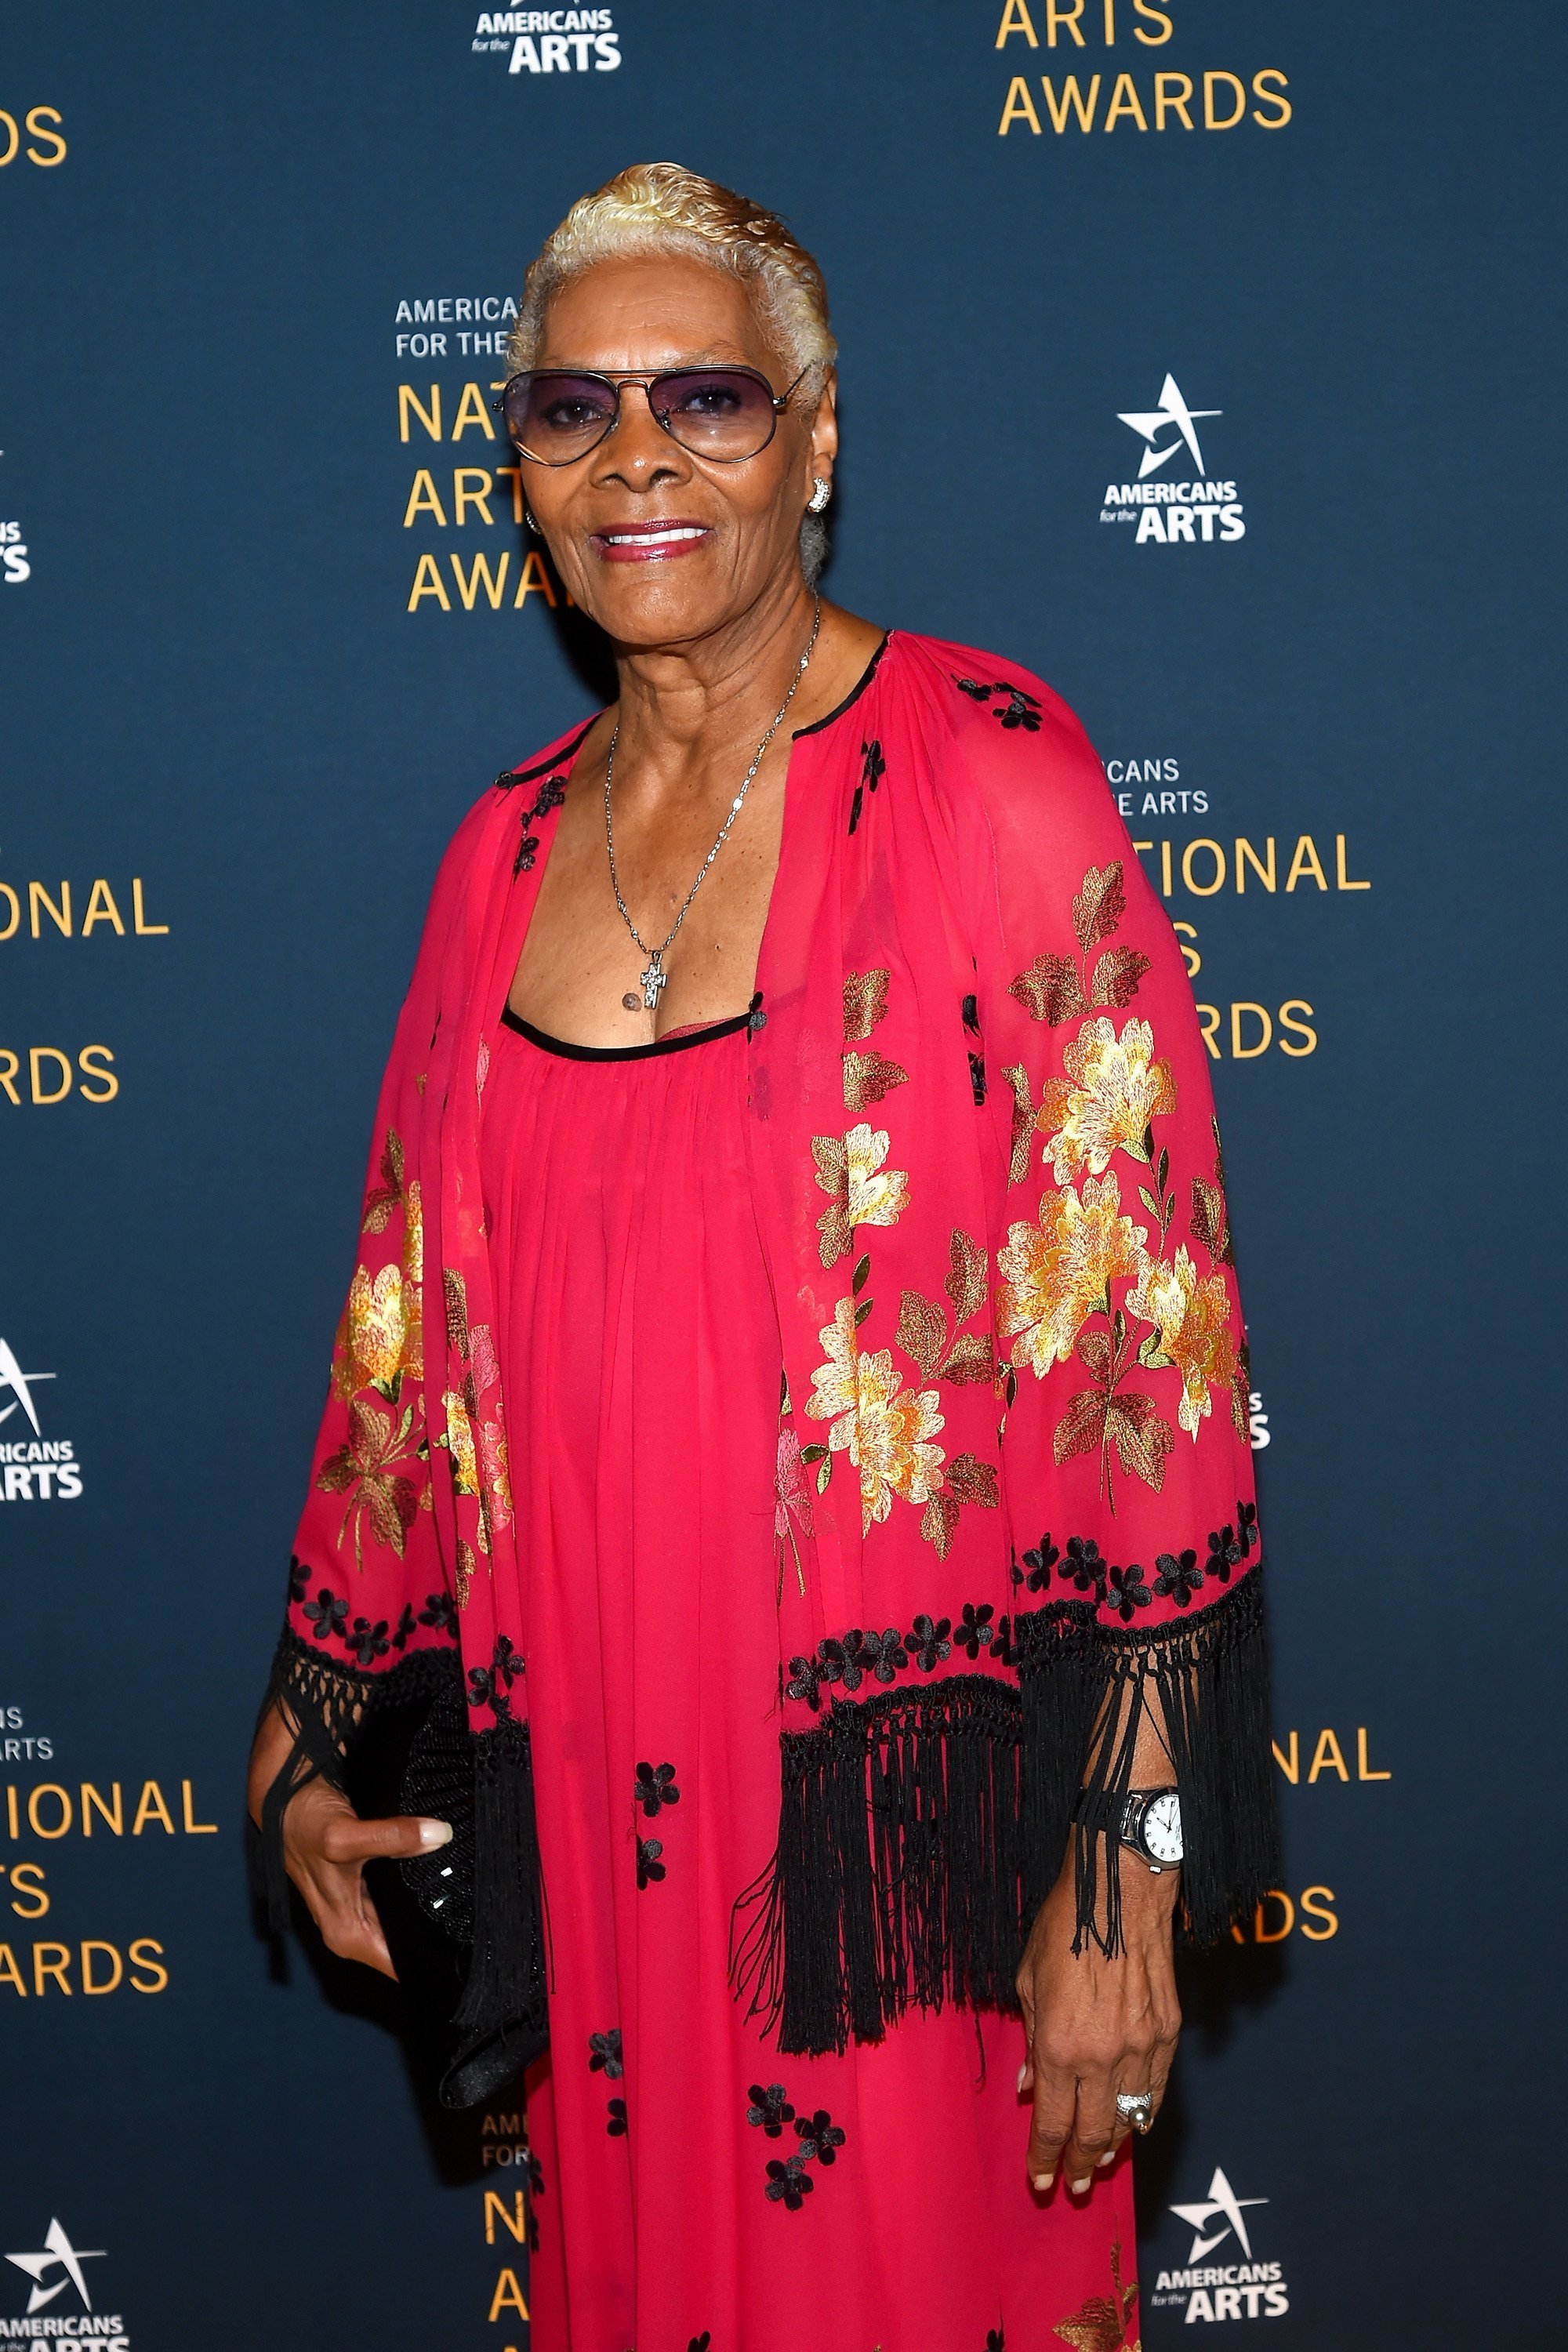 Dionne Warwick at the National Art Awards in October 2017. | Photo: Getty Images